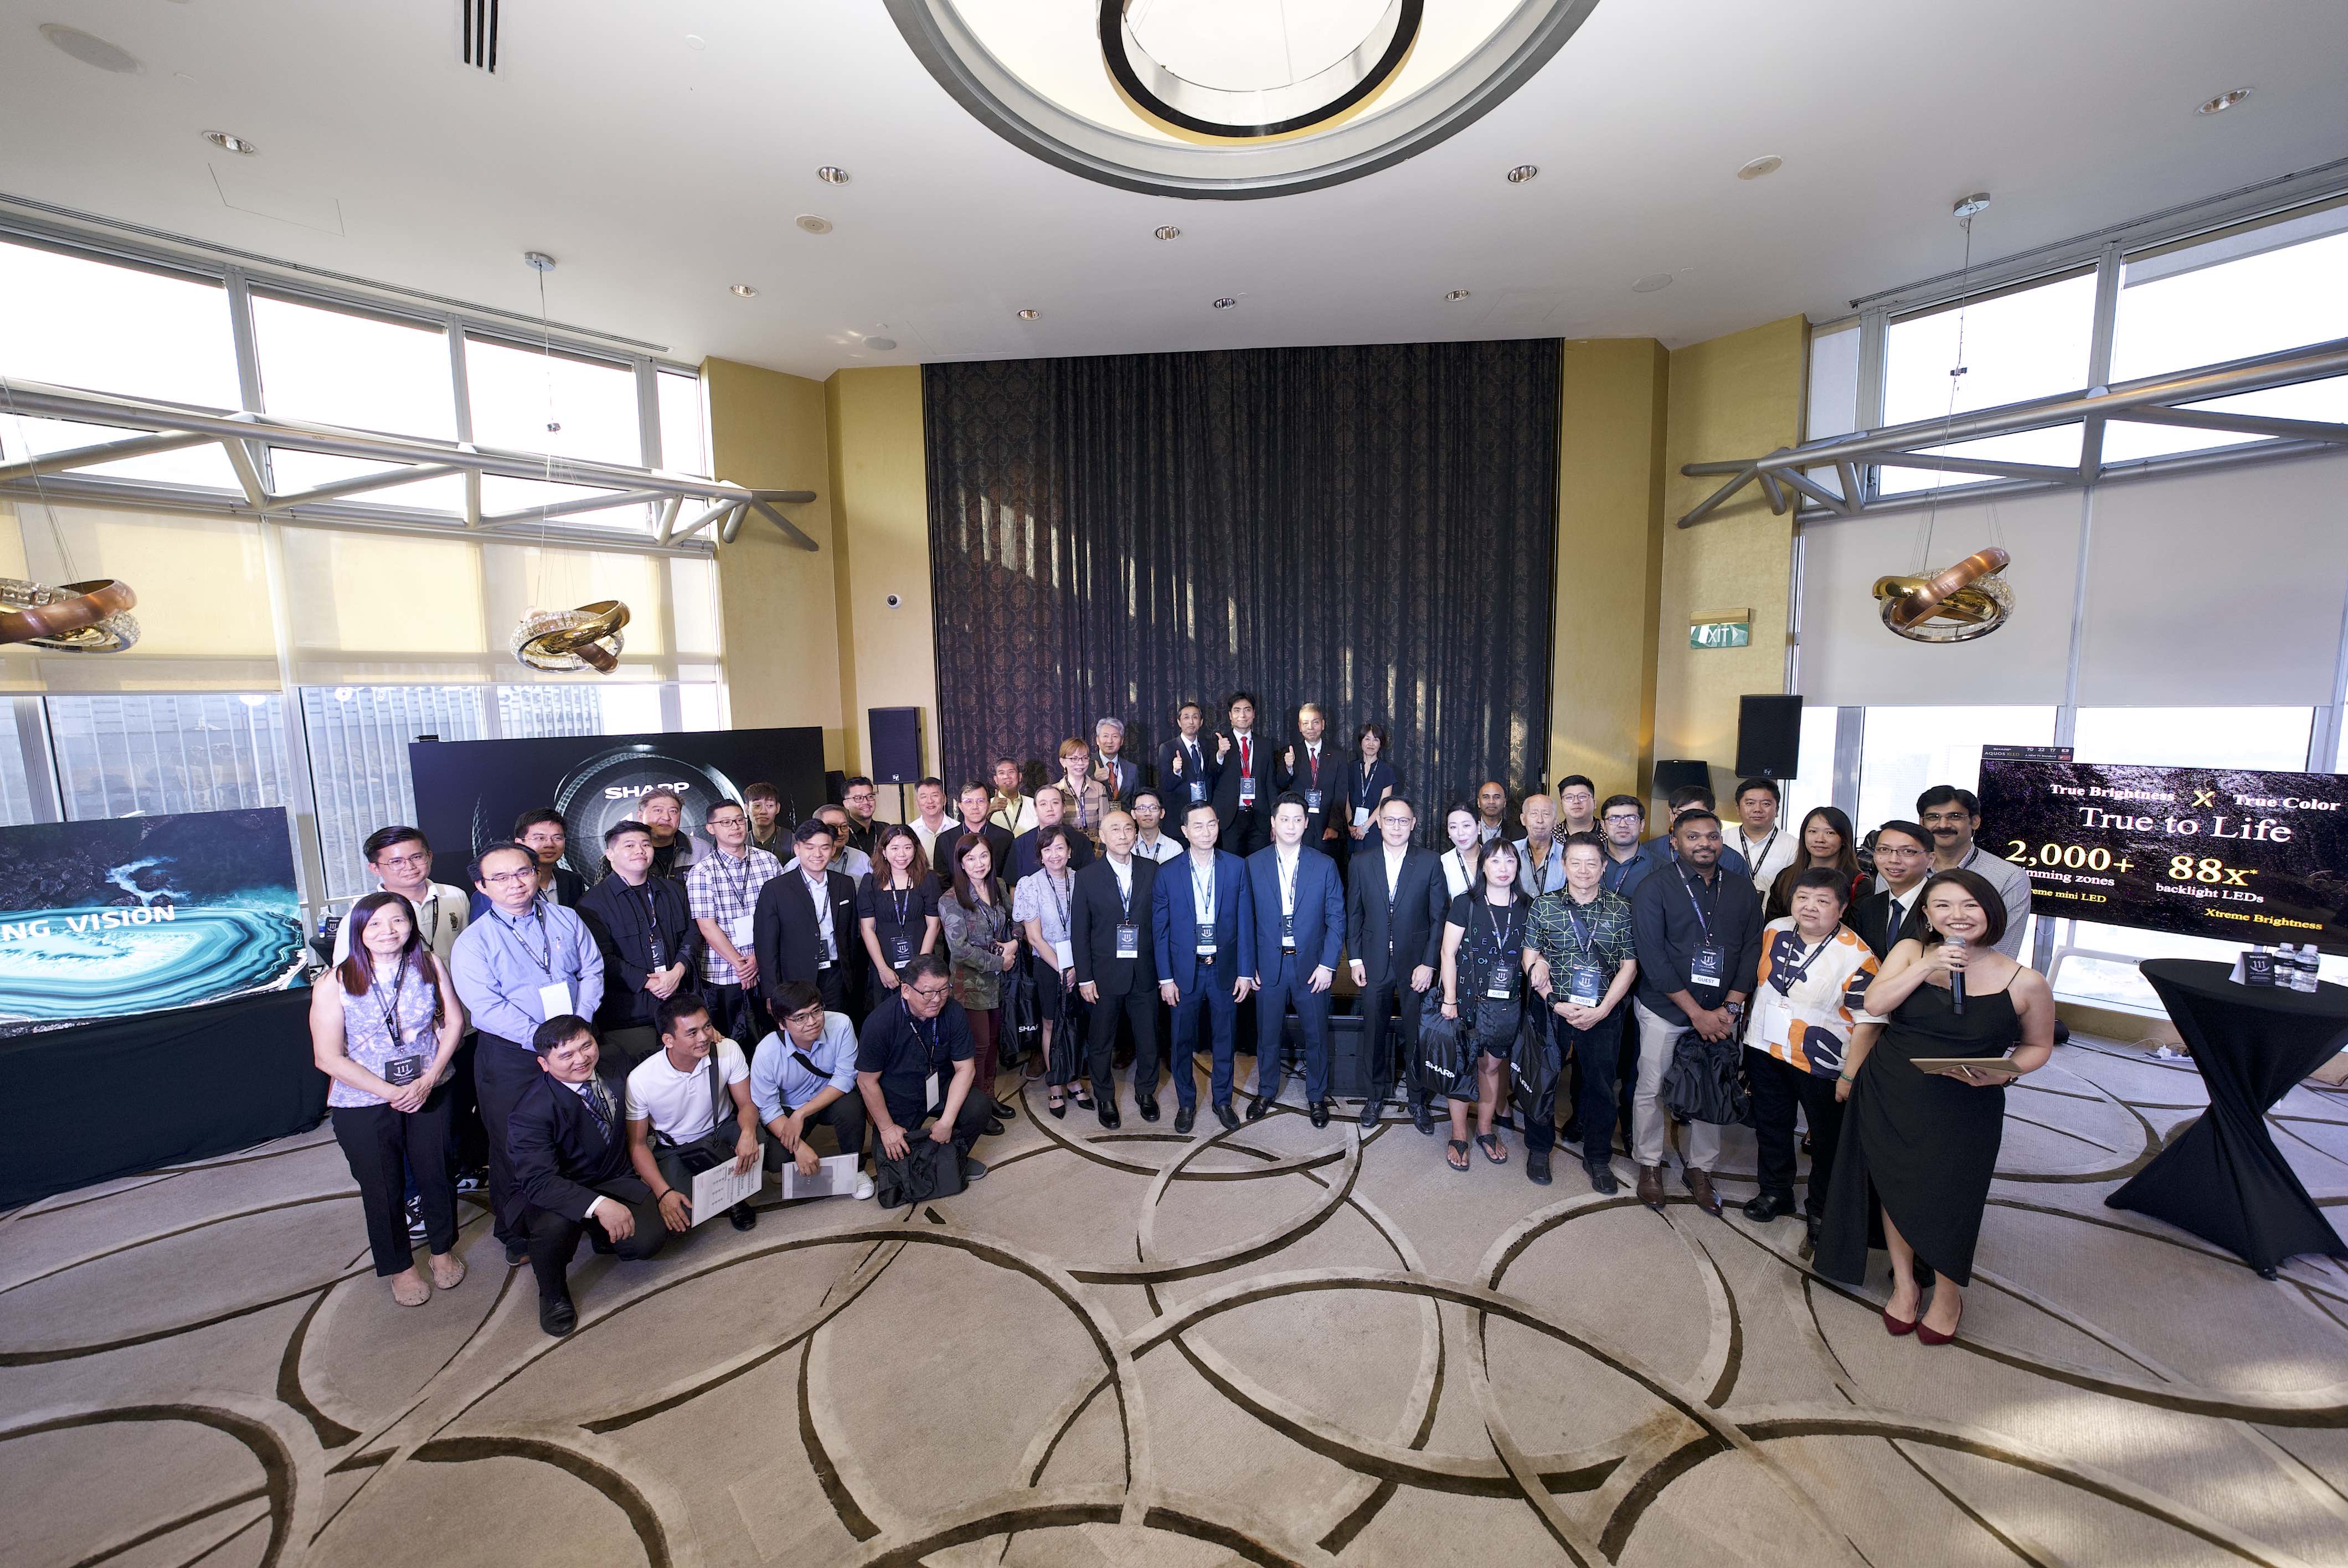 Group photo of management team from SHARP Singapore, distinguished guests from SHARP Japan and attendees at the SHARP 111th-anniversary launch event in Singapore